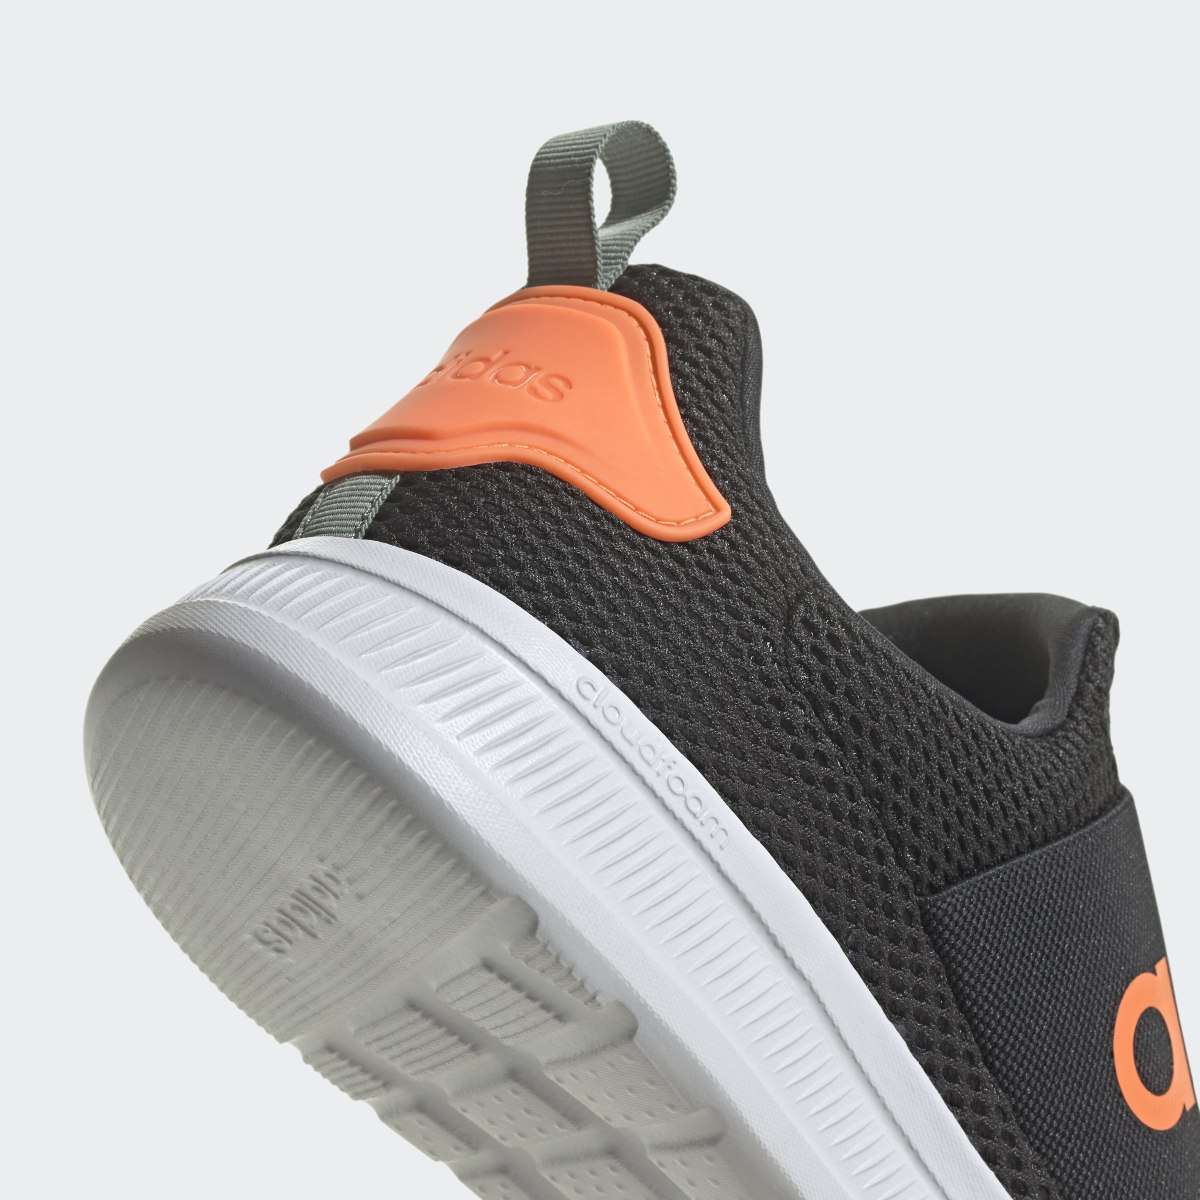 Adidas Lite Racer Adapt 4.0 Shoes. 9